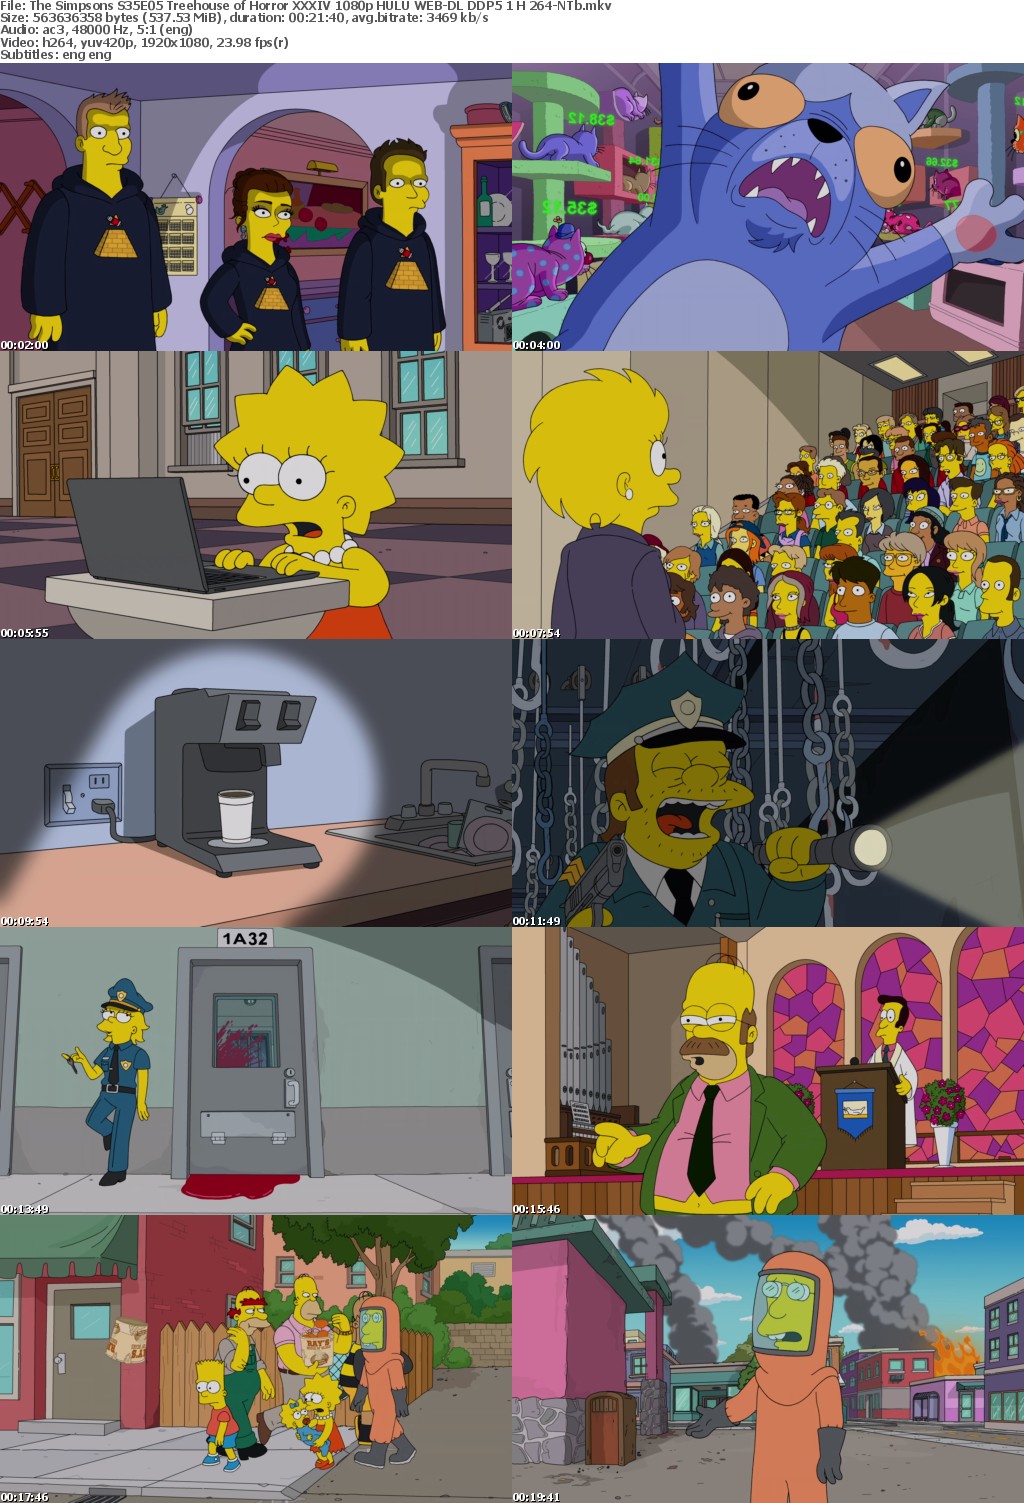 The Simpsons S35E05 Treehouse of Horror XXXIV 1080p HULU WEB-DL DDP5 1 H 264-NTb